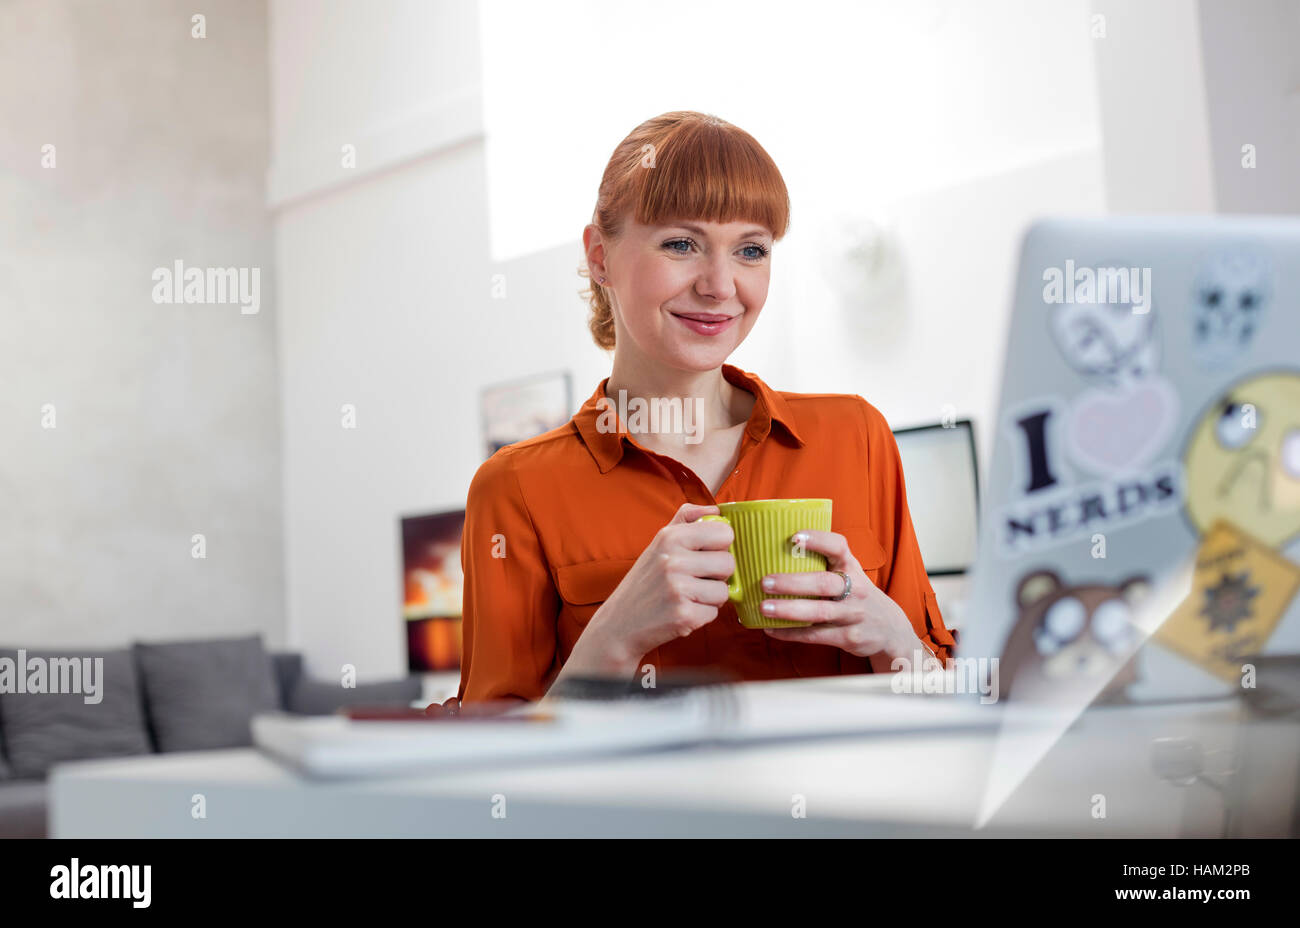 Smiling woman drinking coffee and working at laptop Banque D'Images